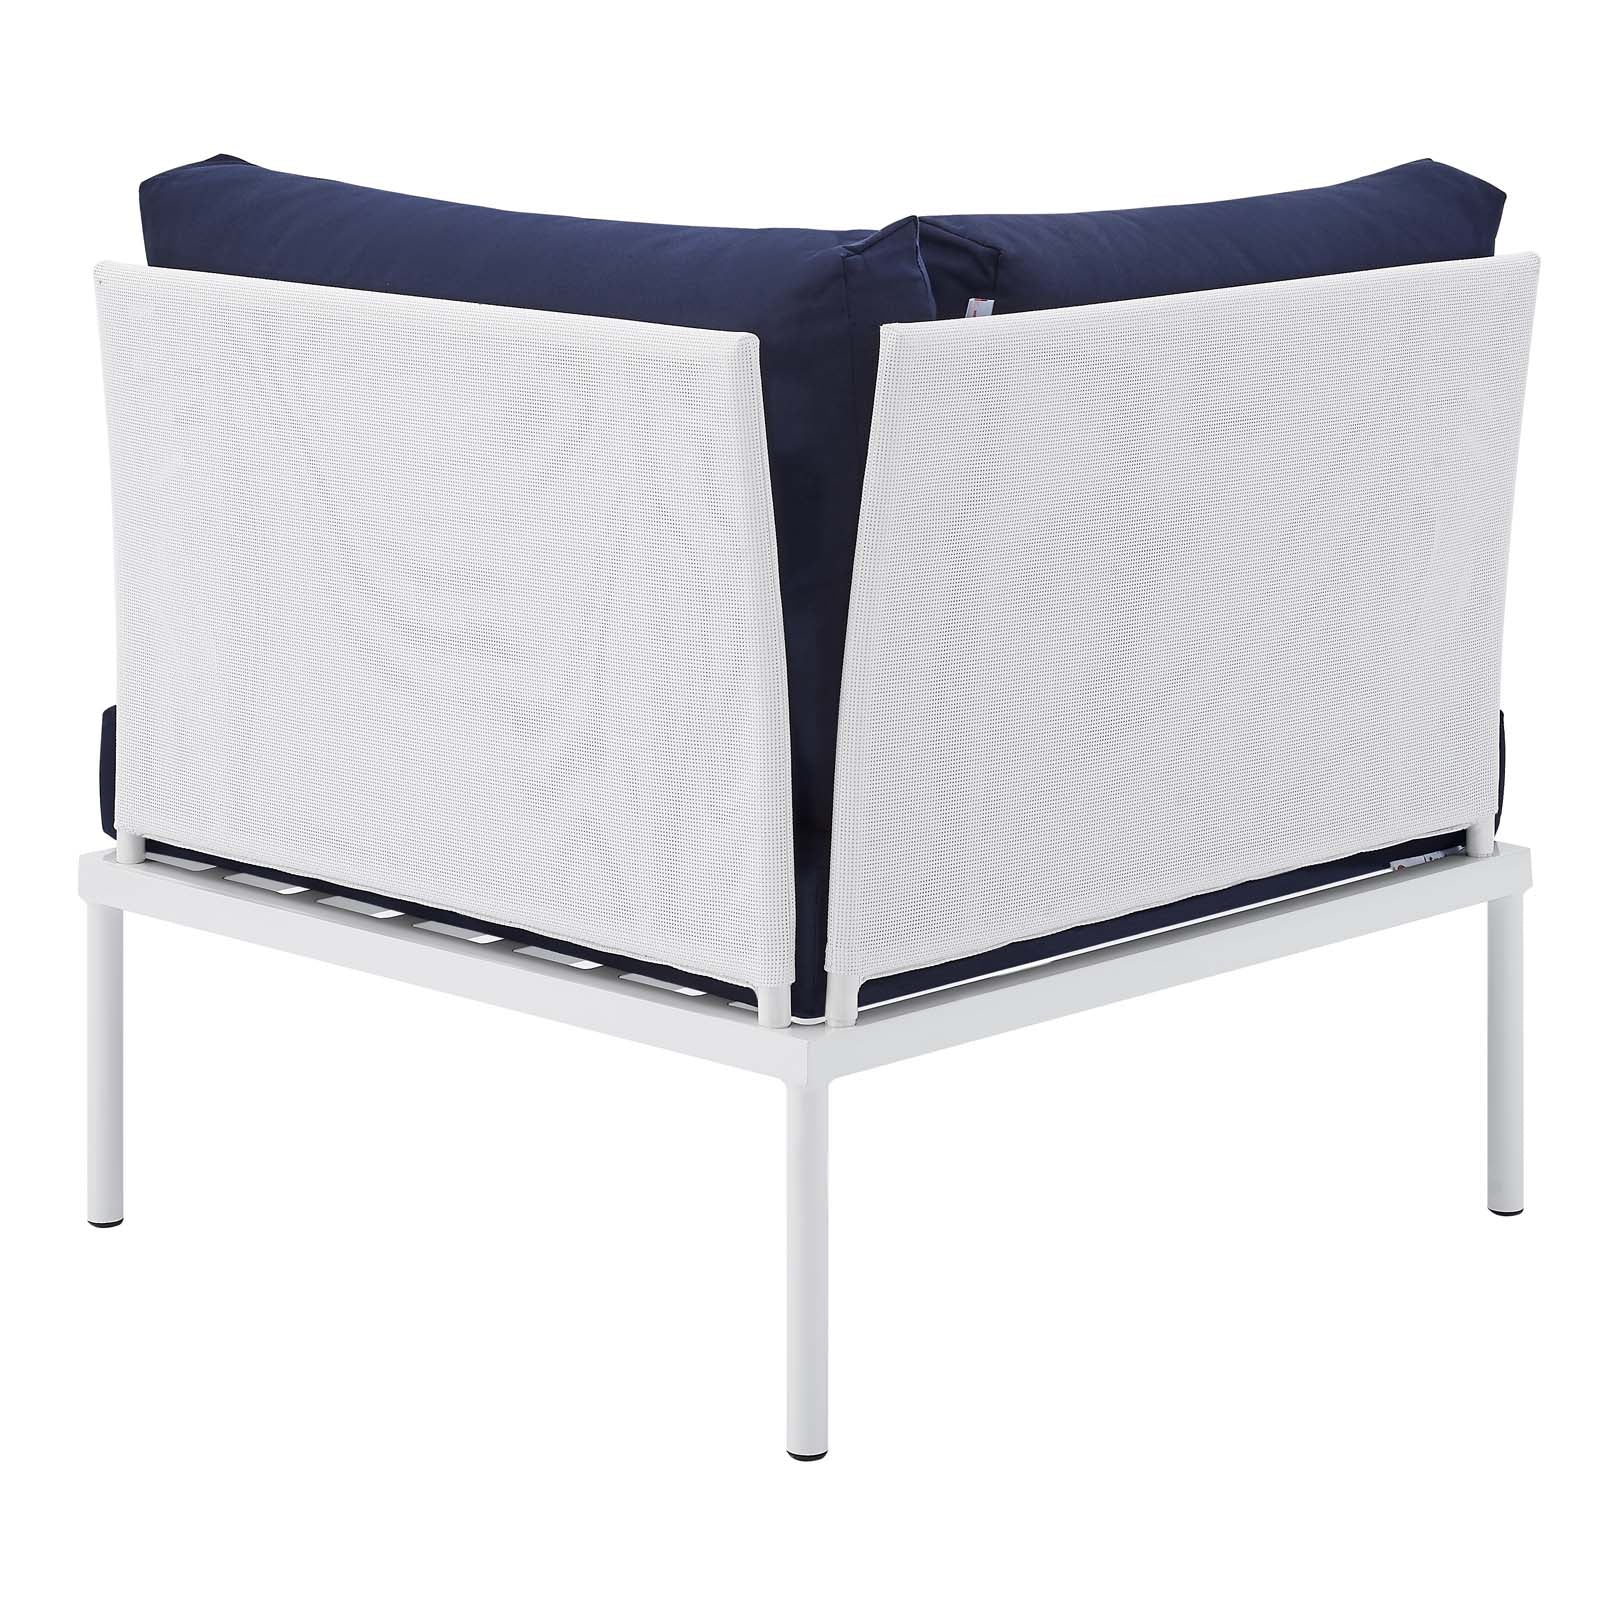 Modway Outdoor Chairs - Harmony Sunbrella Outdoor Patio All Mesh Corner Chair White Navy